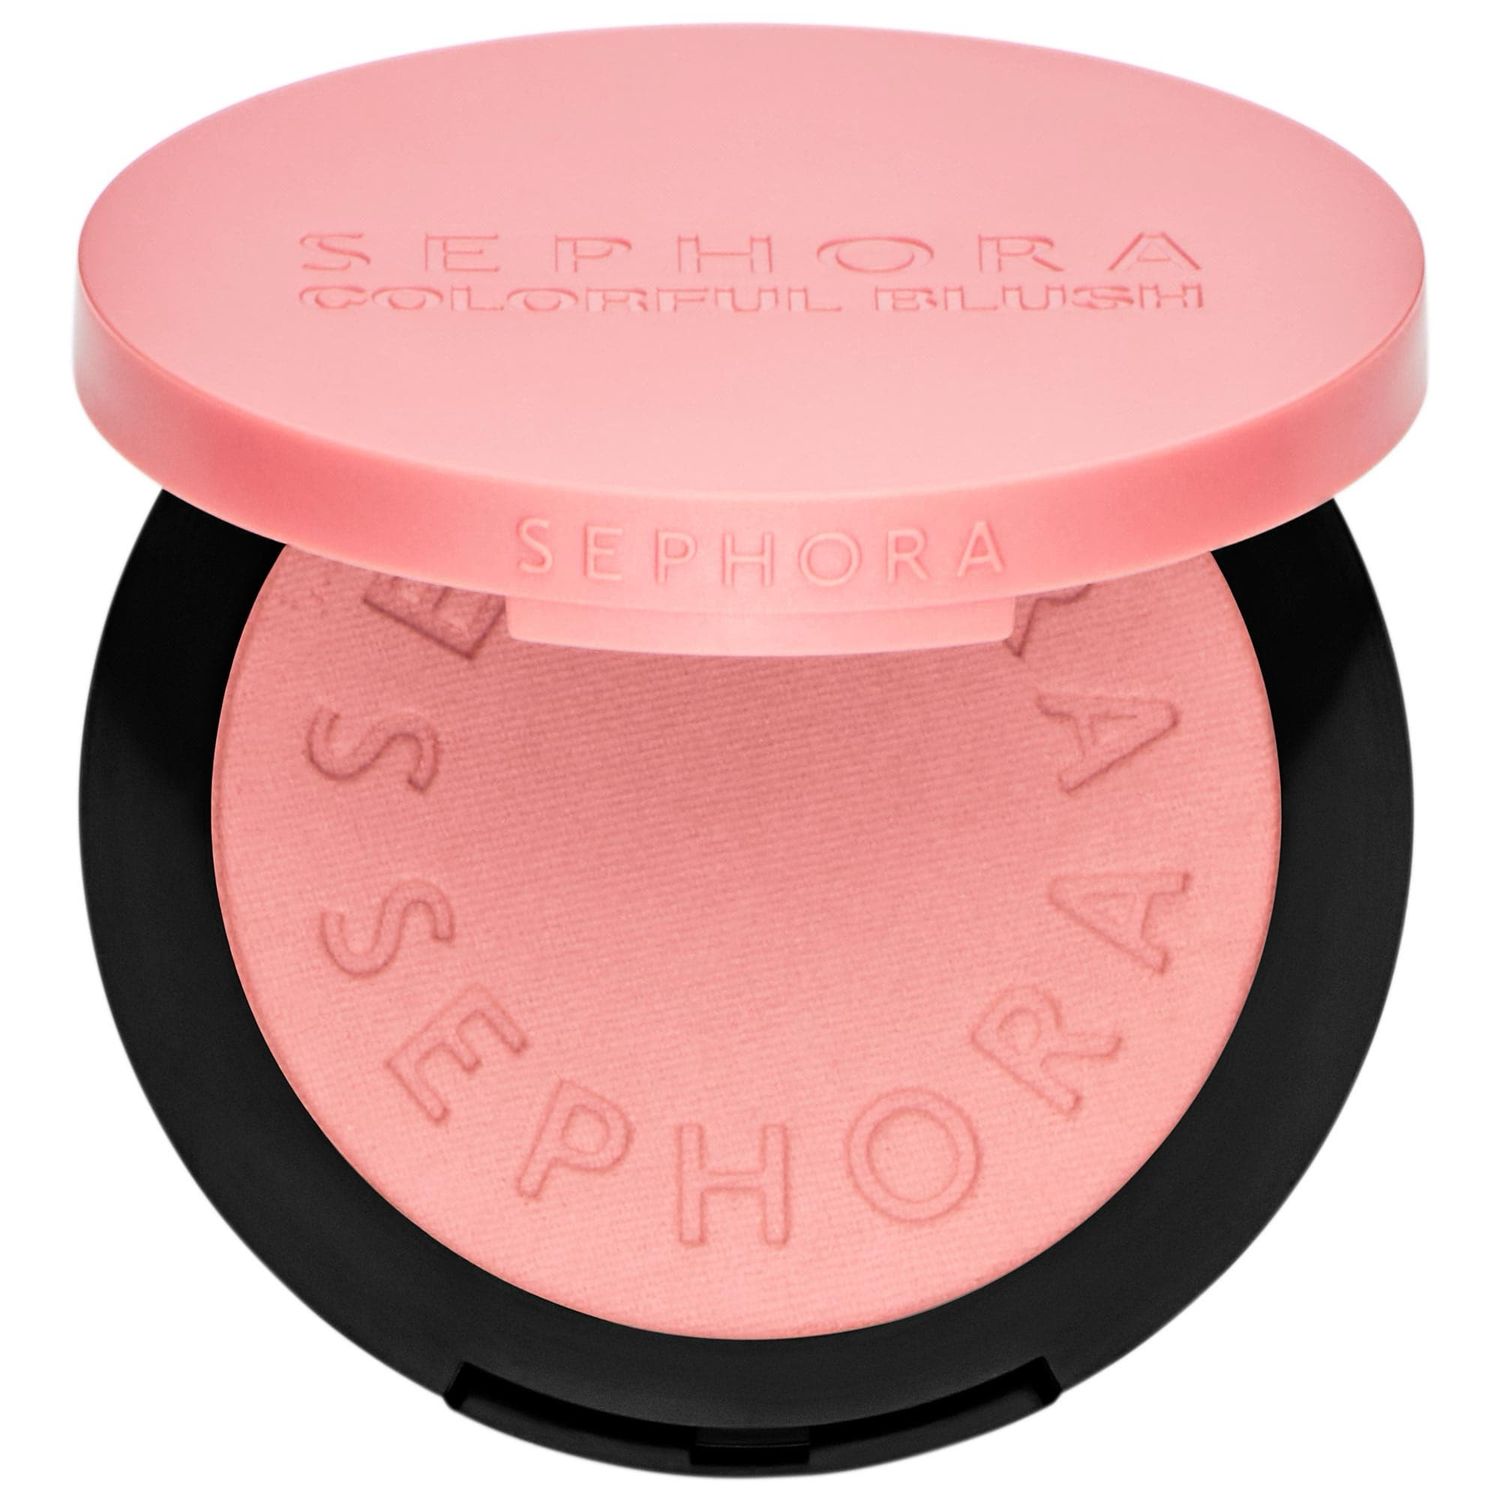 Sephora Collection - Sephora Colorful® Blush | 02 So Shy - soft peachy pink